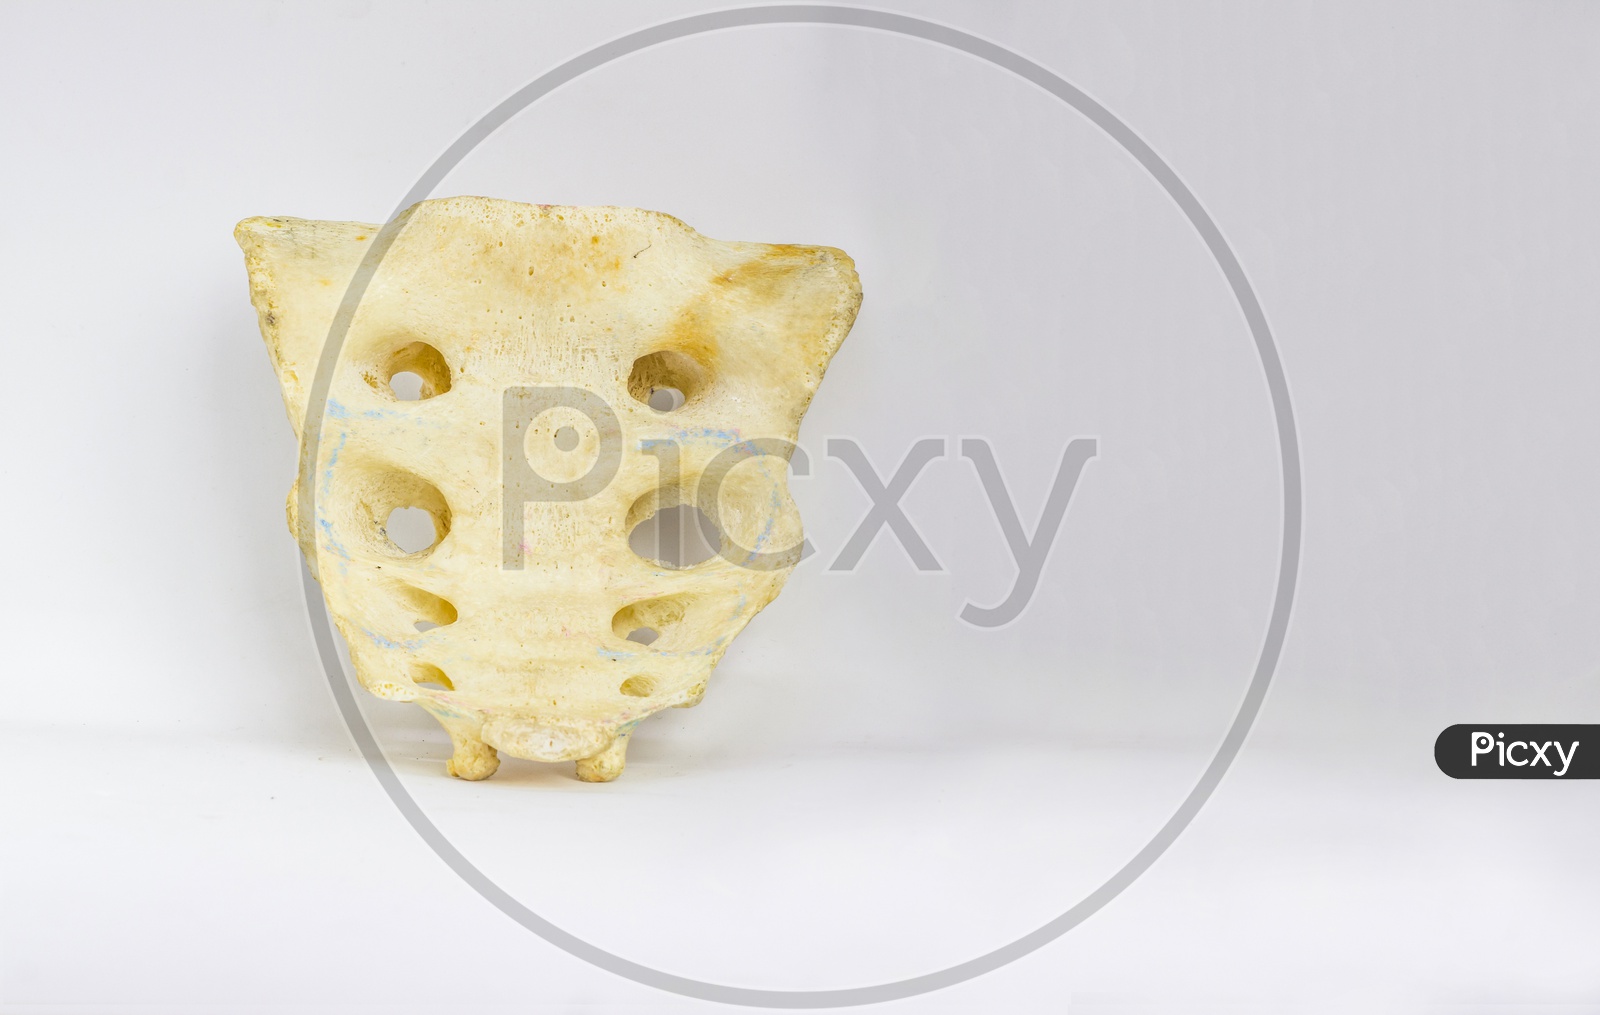 Human Sacrum Spine Bone Isolated In White Background With Space For Text